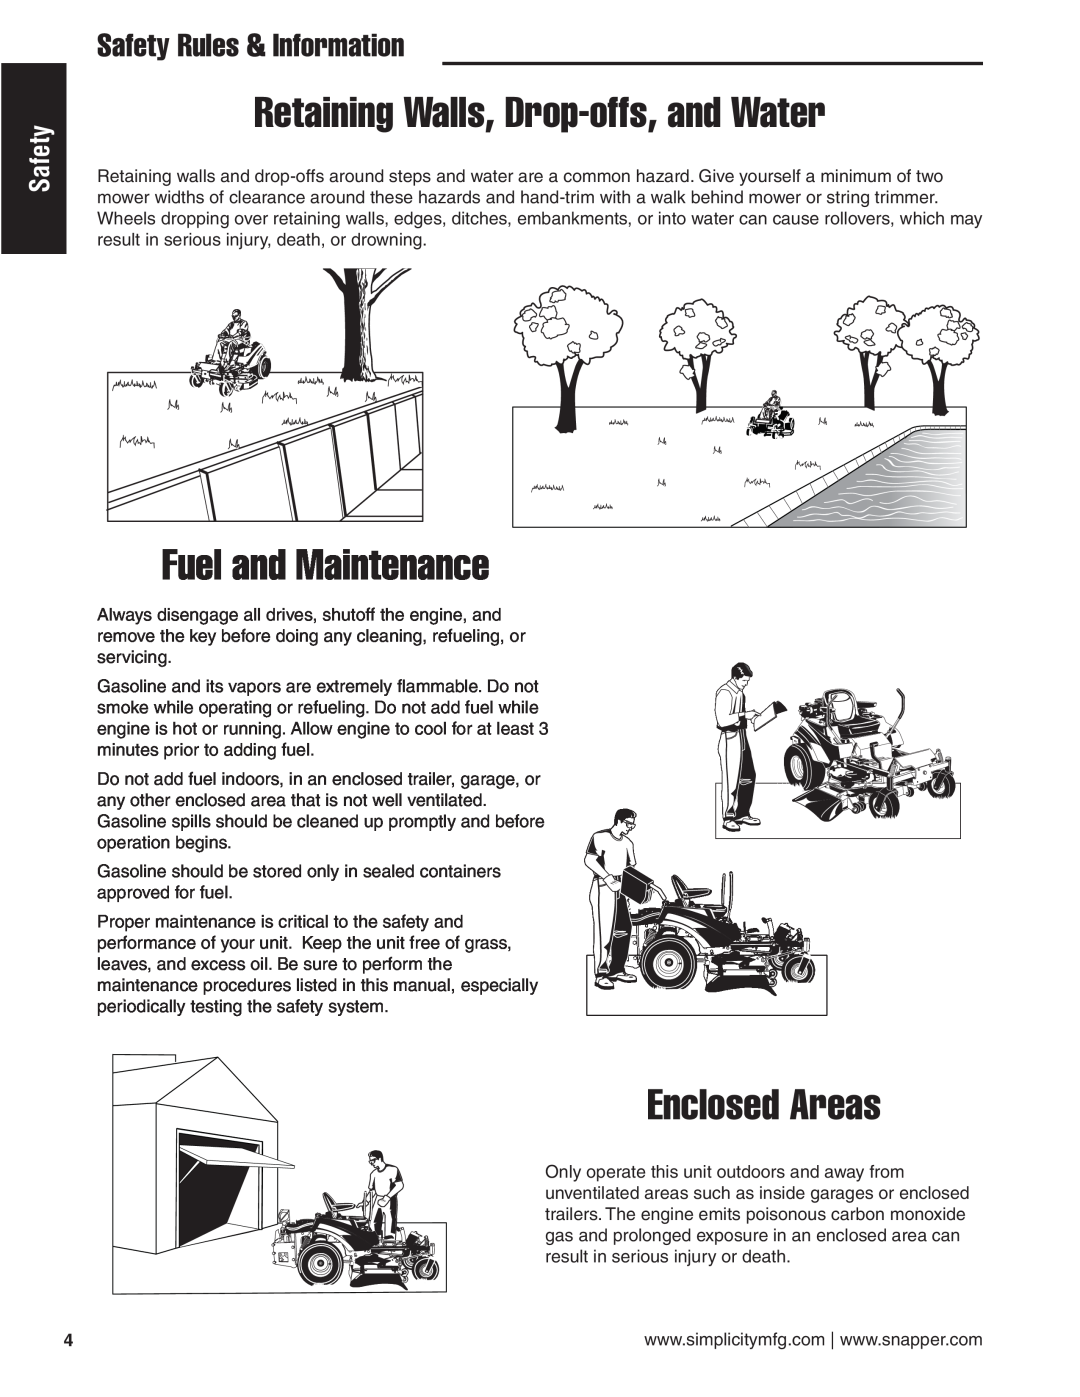 Simplicity 24HP Retaining Walls, Drop-offs,and Water, Fuel and Maintenance, Enclosed Areas, Safety Rules & Information 